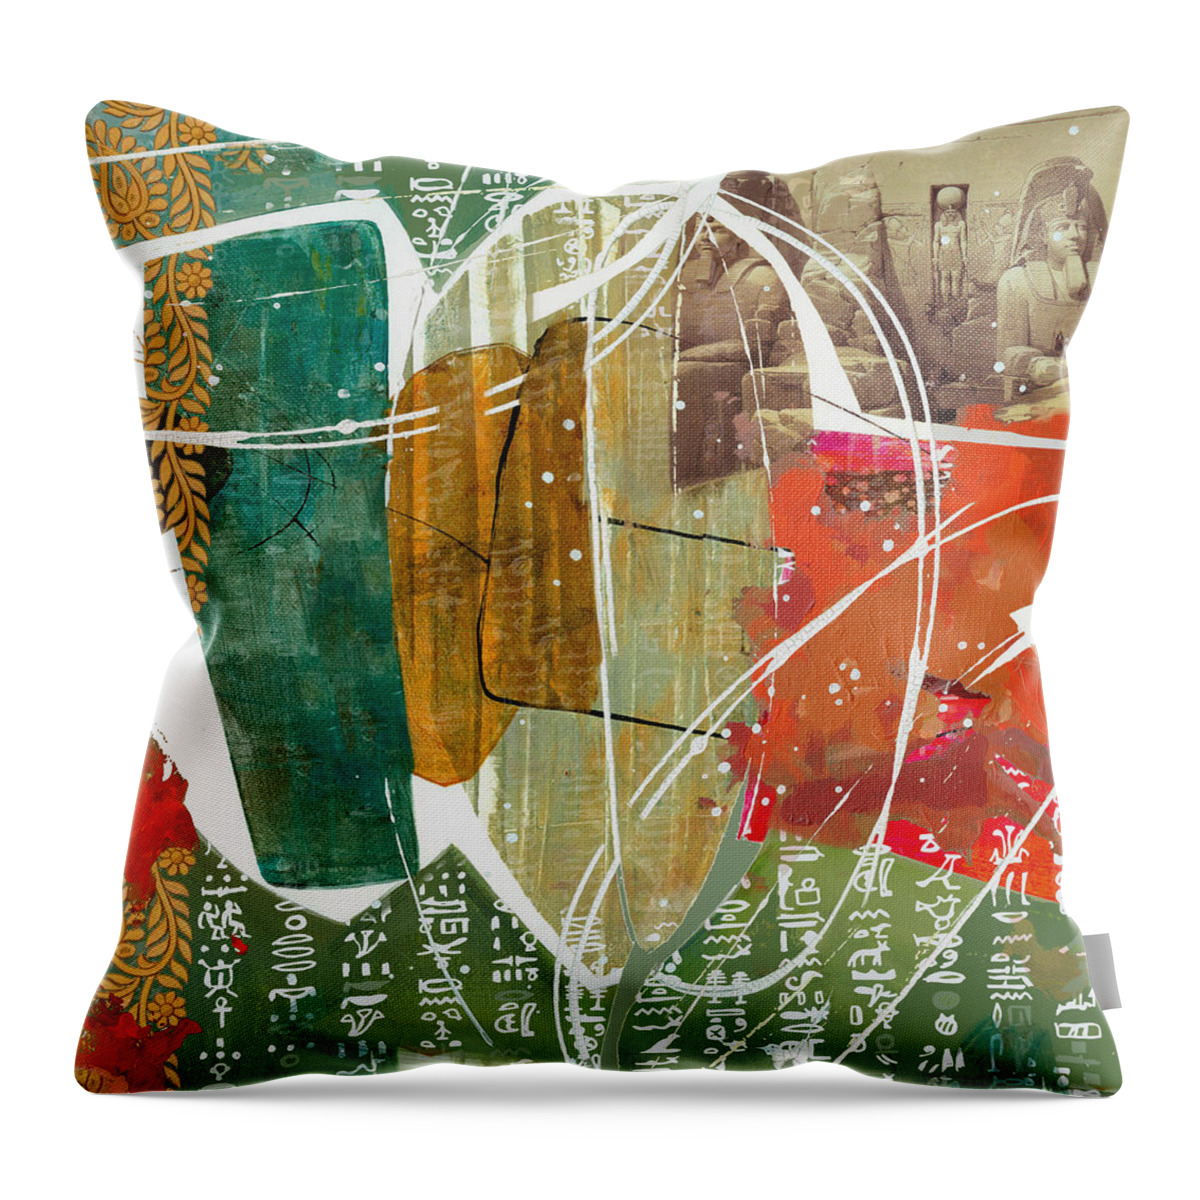 Egypt Throw Pillow featuring the painting Egyptian Culture 73b by Maryam Mughal